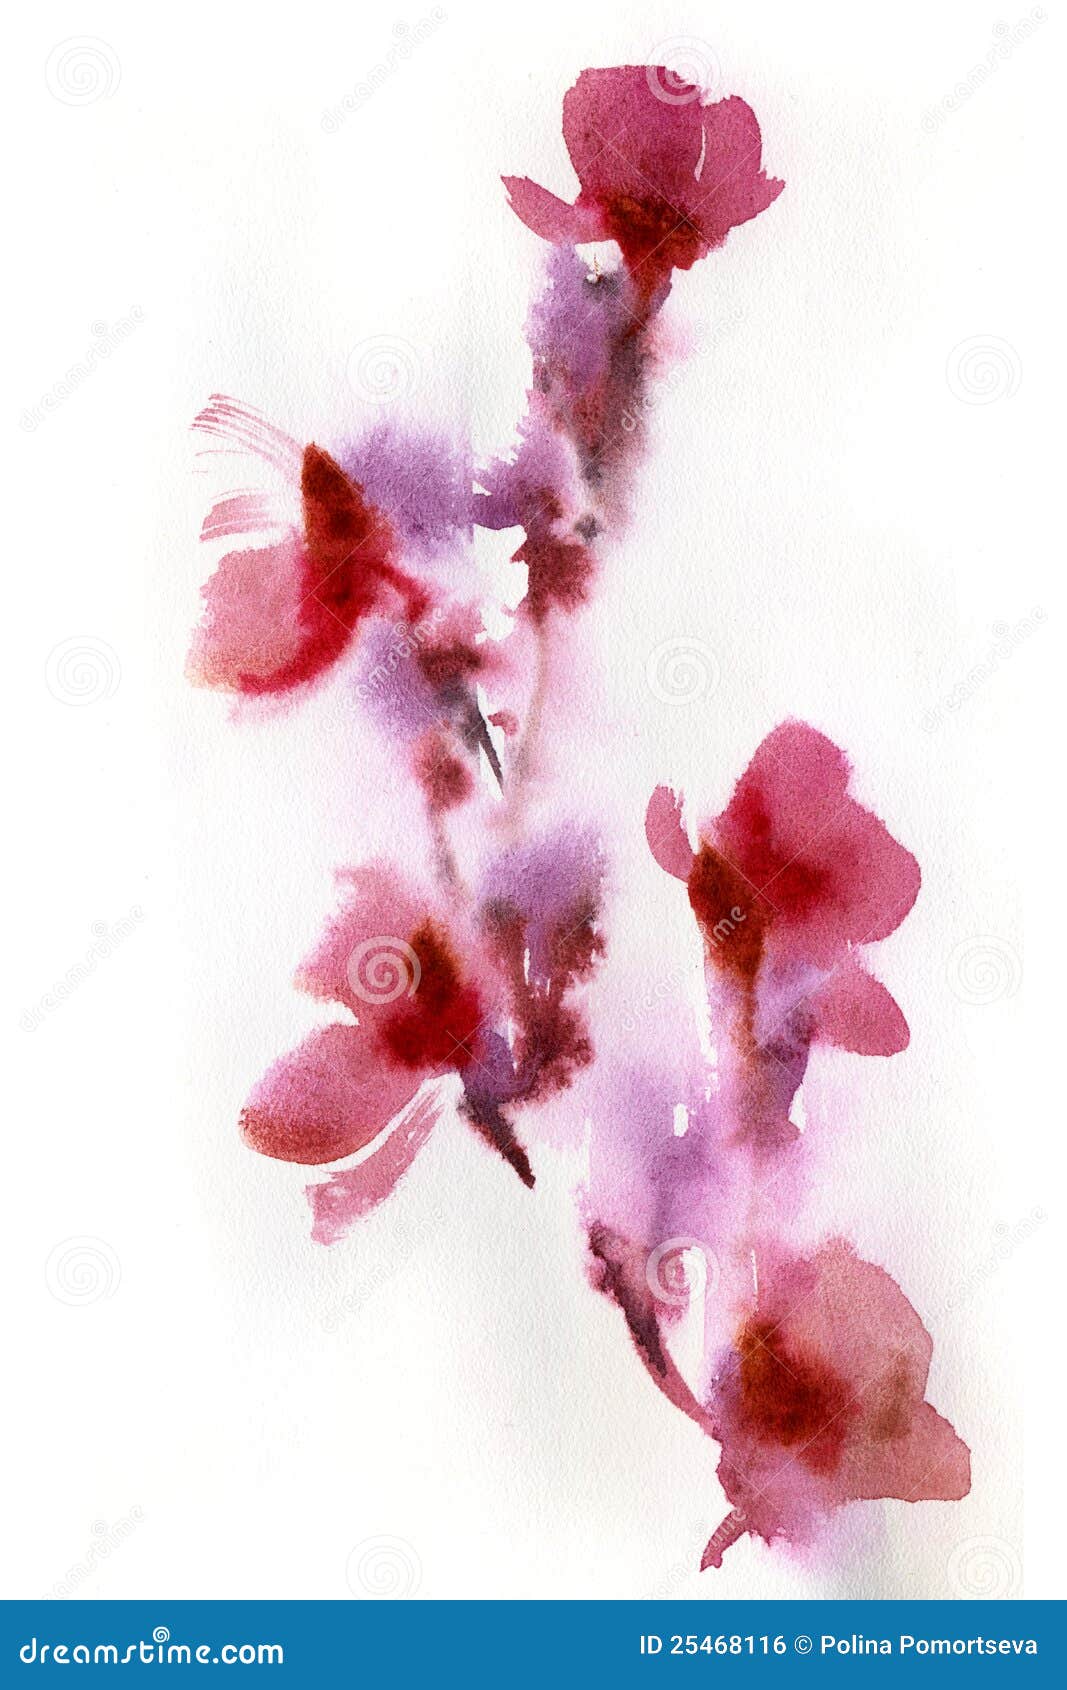 Abstract Floral Watercolor Illustration Megapixl